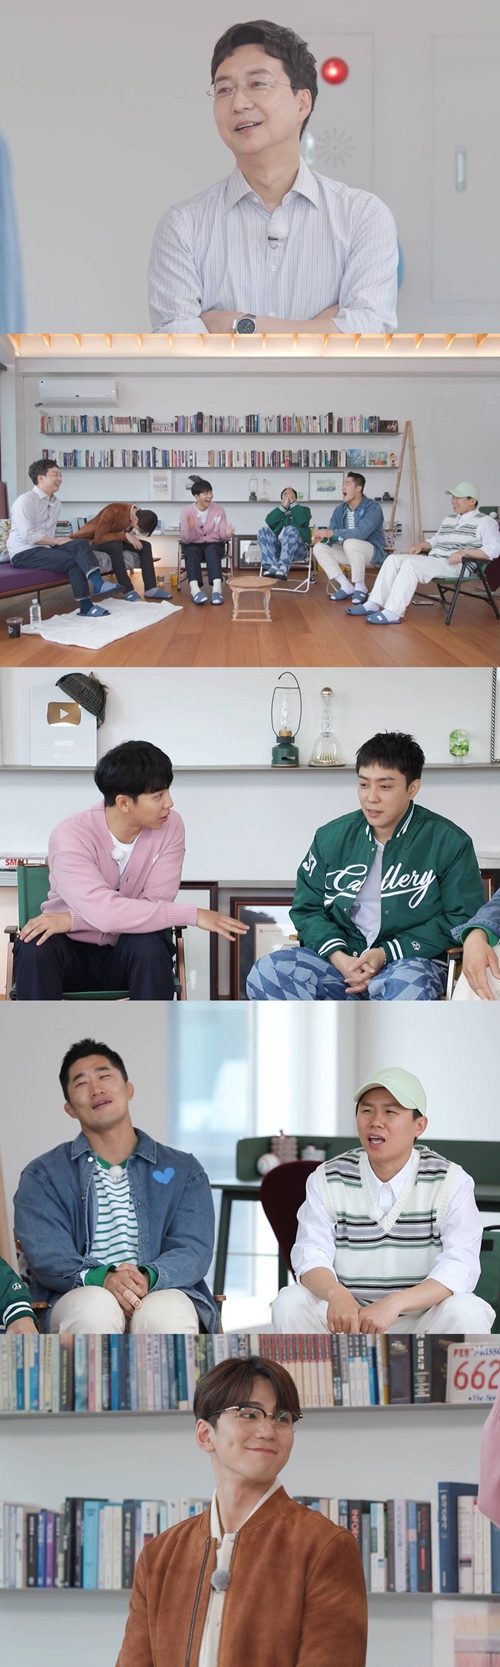 SBS All The Butlers, which is broadcasted at 6:30 pm on the 24th, features Sherlock yu hyun-jun architect of architecture as Sabu.All The Butlers Lee Seung Gi, Yang Se Hyung, Kim Dong-Hyun, and Eun Ji Won met Humanities Architect Yu hun-jun Sabu, who looks at humans and the world through space at an office in Gangnam.Members who visited the office of yu hun-jun did not shut up when they saw the sensual architectural interior, his colorful MIT, and Harvard Business School diploma.In addition, the members expressed their expectation for a day with Yu hun-jun Sabu, who introduced me as Sherlock, saying, If you know your house, you can know people.Yu hun-jun then revealed the architectural secrets of the Harvard Business School building from the behind-the-scenes story at the time of Harvard Business School, and explained his own desire for space to reveal himself.The members were impressed by Sabus beneficial architectural story that connects space and social phenomena to see through the world.In addition, Yu hun-jun Sabu expresses himself as a desire lump, and the house he really wants is called OOO, making the scene into a laughing sea.I am curious about what kind of house it was.On the other hand, Kim Min-kyu, who played a big role in the SBS drama In-house Against as a special daily secretary of Sabu, will appear on the day.He is the back door of the study of architecture, focusing on Sabus words, and hopes for what Kim Min-kyu will do as a daily secretary.Architecture 101, which is told by Sherlock of Architecture yu hun-jun Sabu, will be released on SBS All The Butlers, which will be broadcasted at 6:30 pm on the 24th.SBS